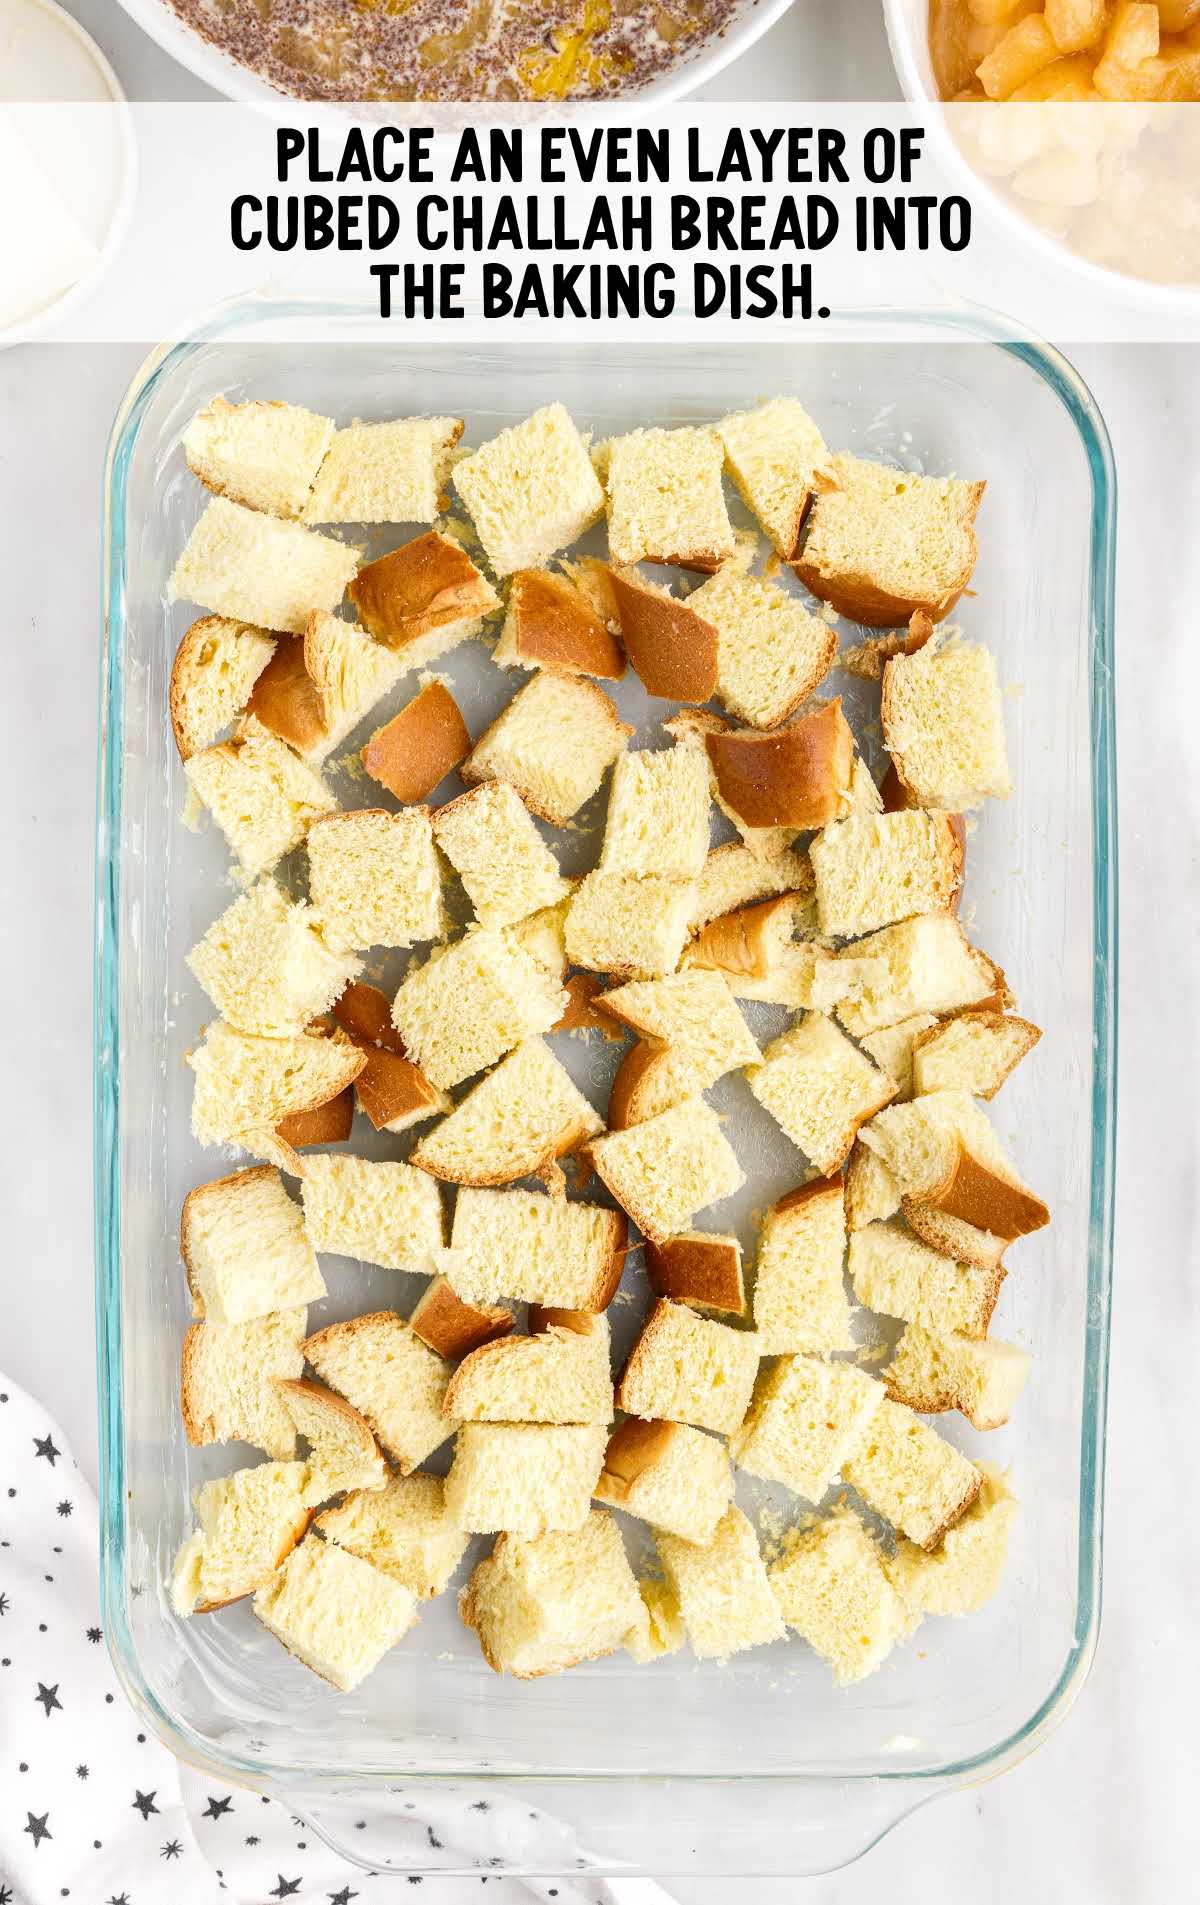 cubed challah bread placed into the baking dish